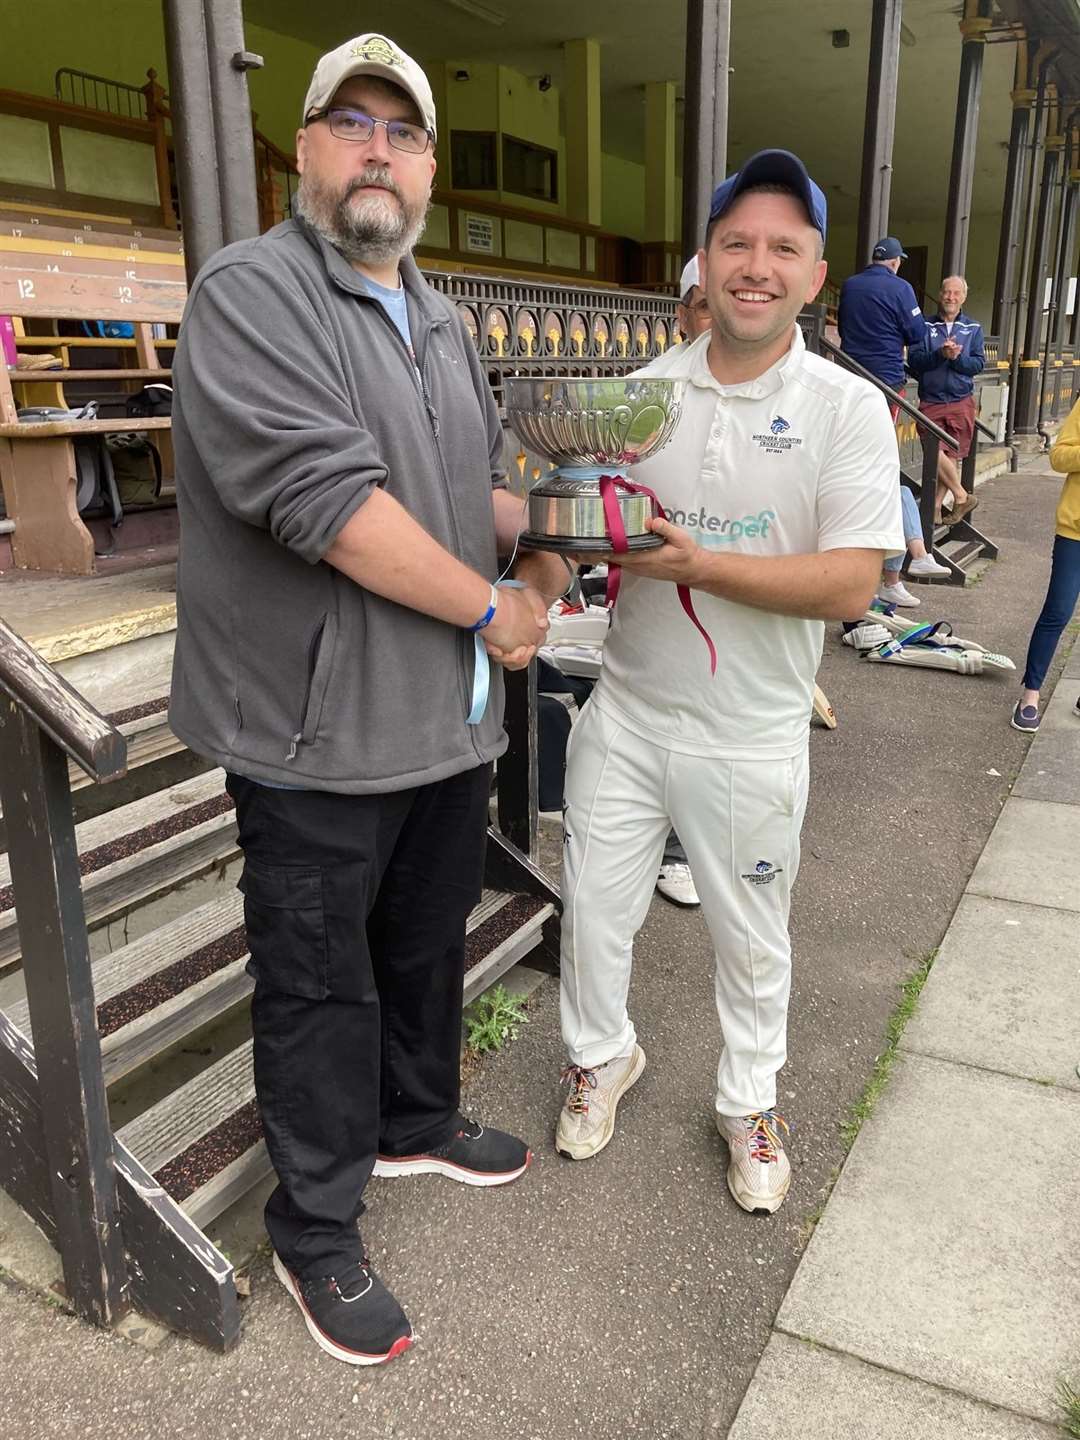 Northern Counties captain Will Ford was presented with the 2023 Senior League trophy.